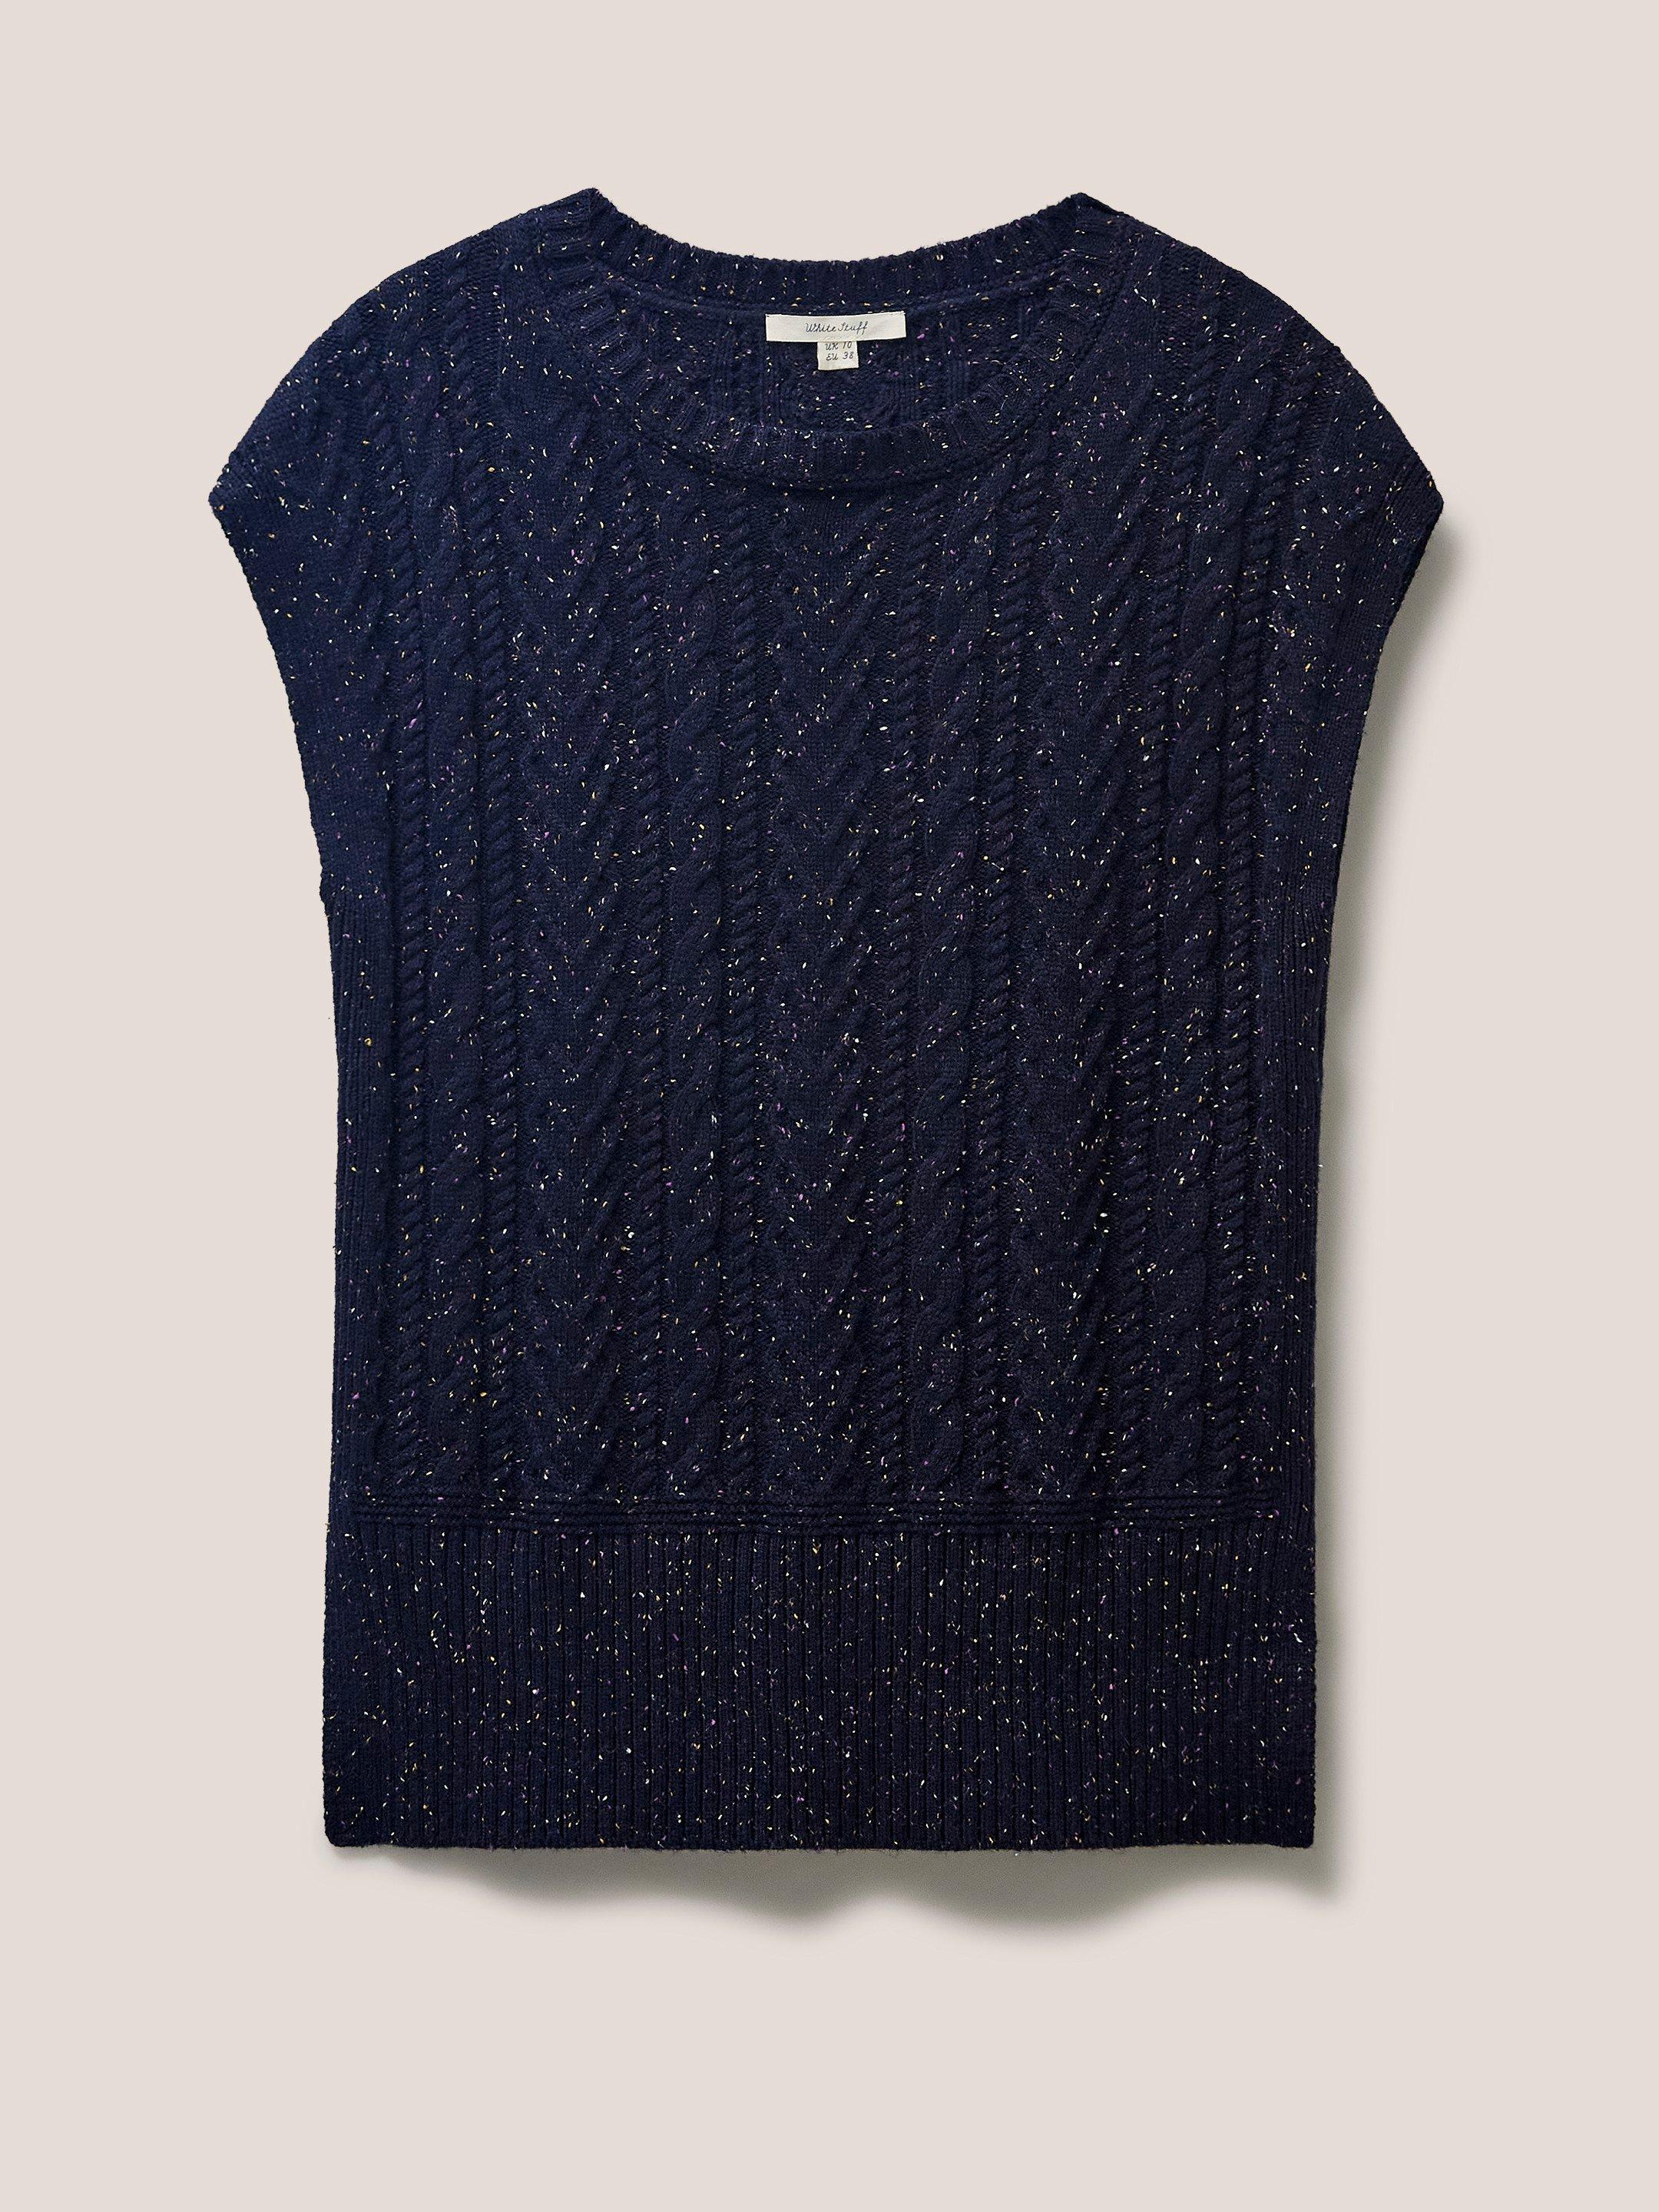 CABLE NEP TANK in DARK NAVY - FLAT FRONT